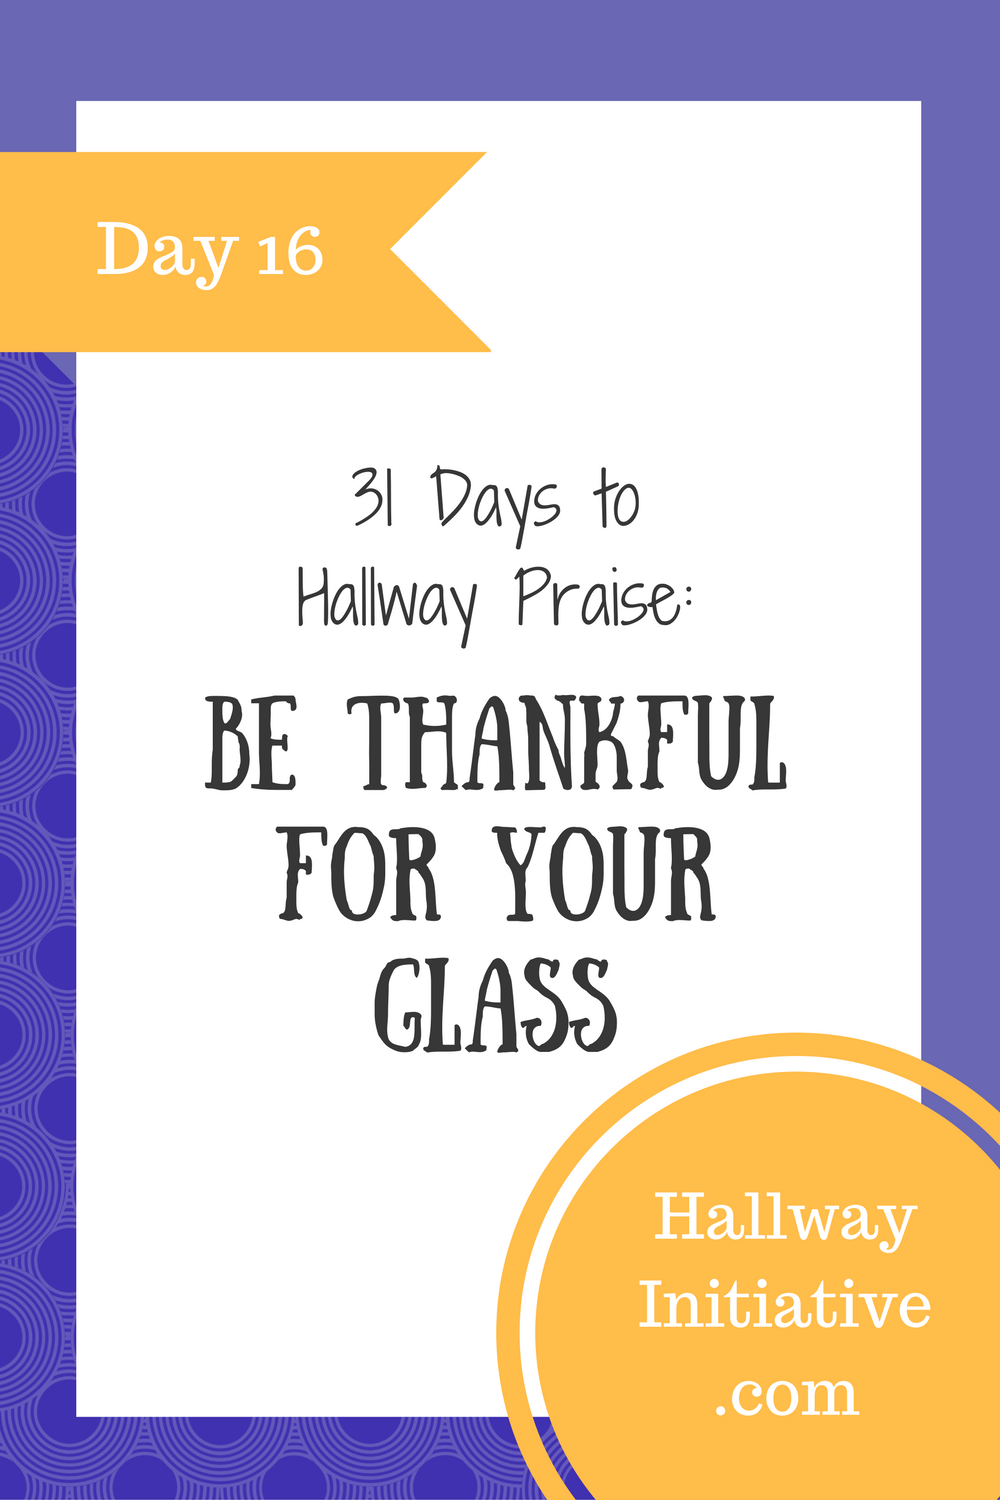 Day 16: be thankful for your glass